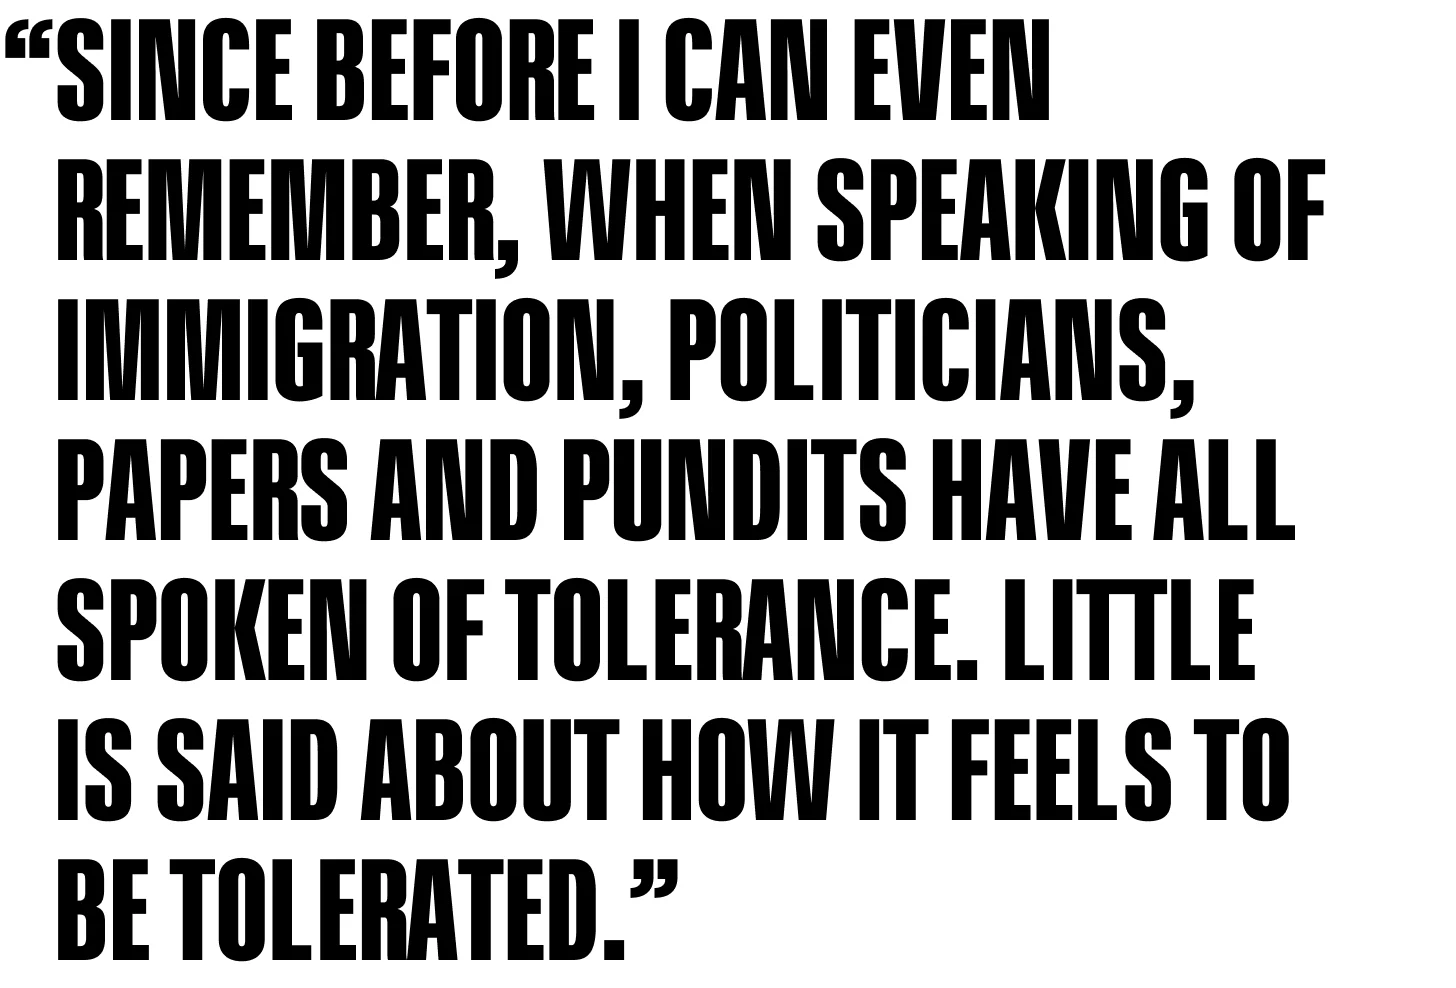 Since before I can even remember, when speaking of immigration, politicians, papers and pundits have all spoken of tolerance. Little is said about how it feels to be tolerated.